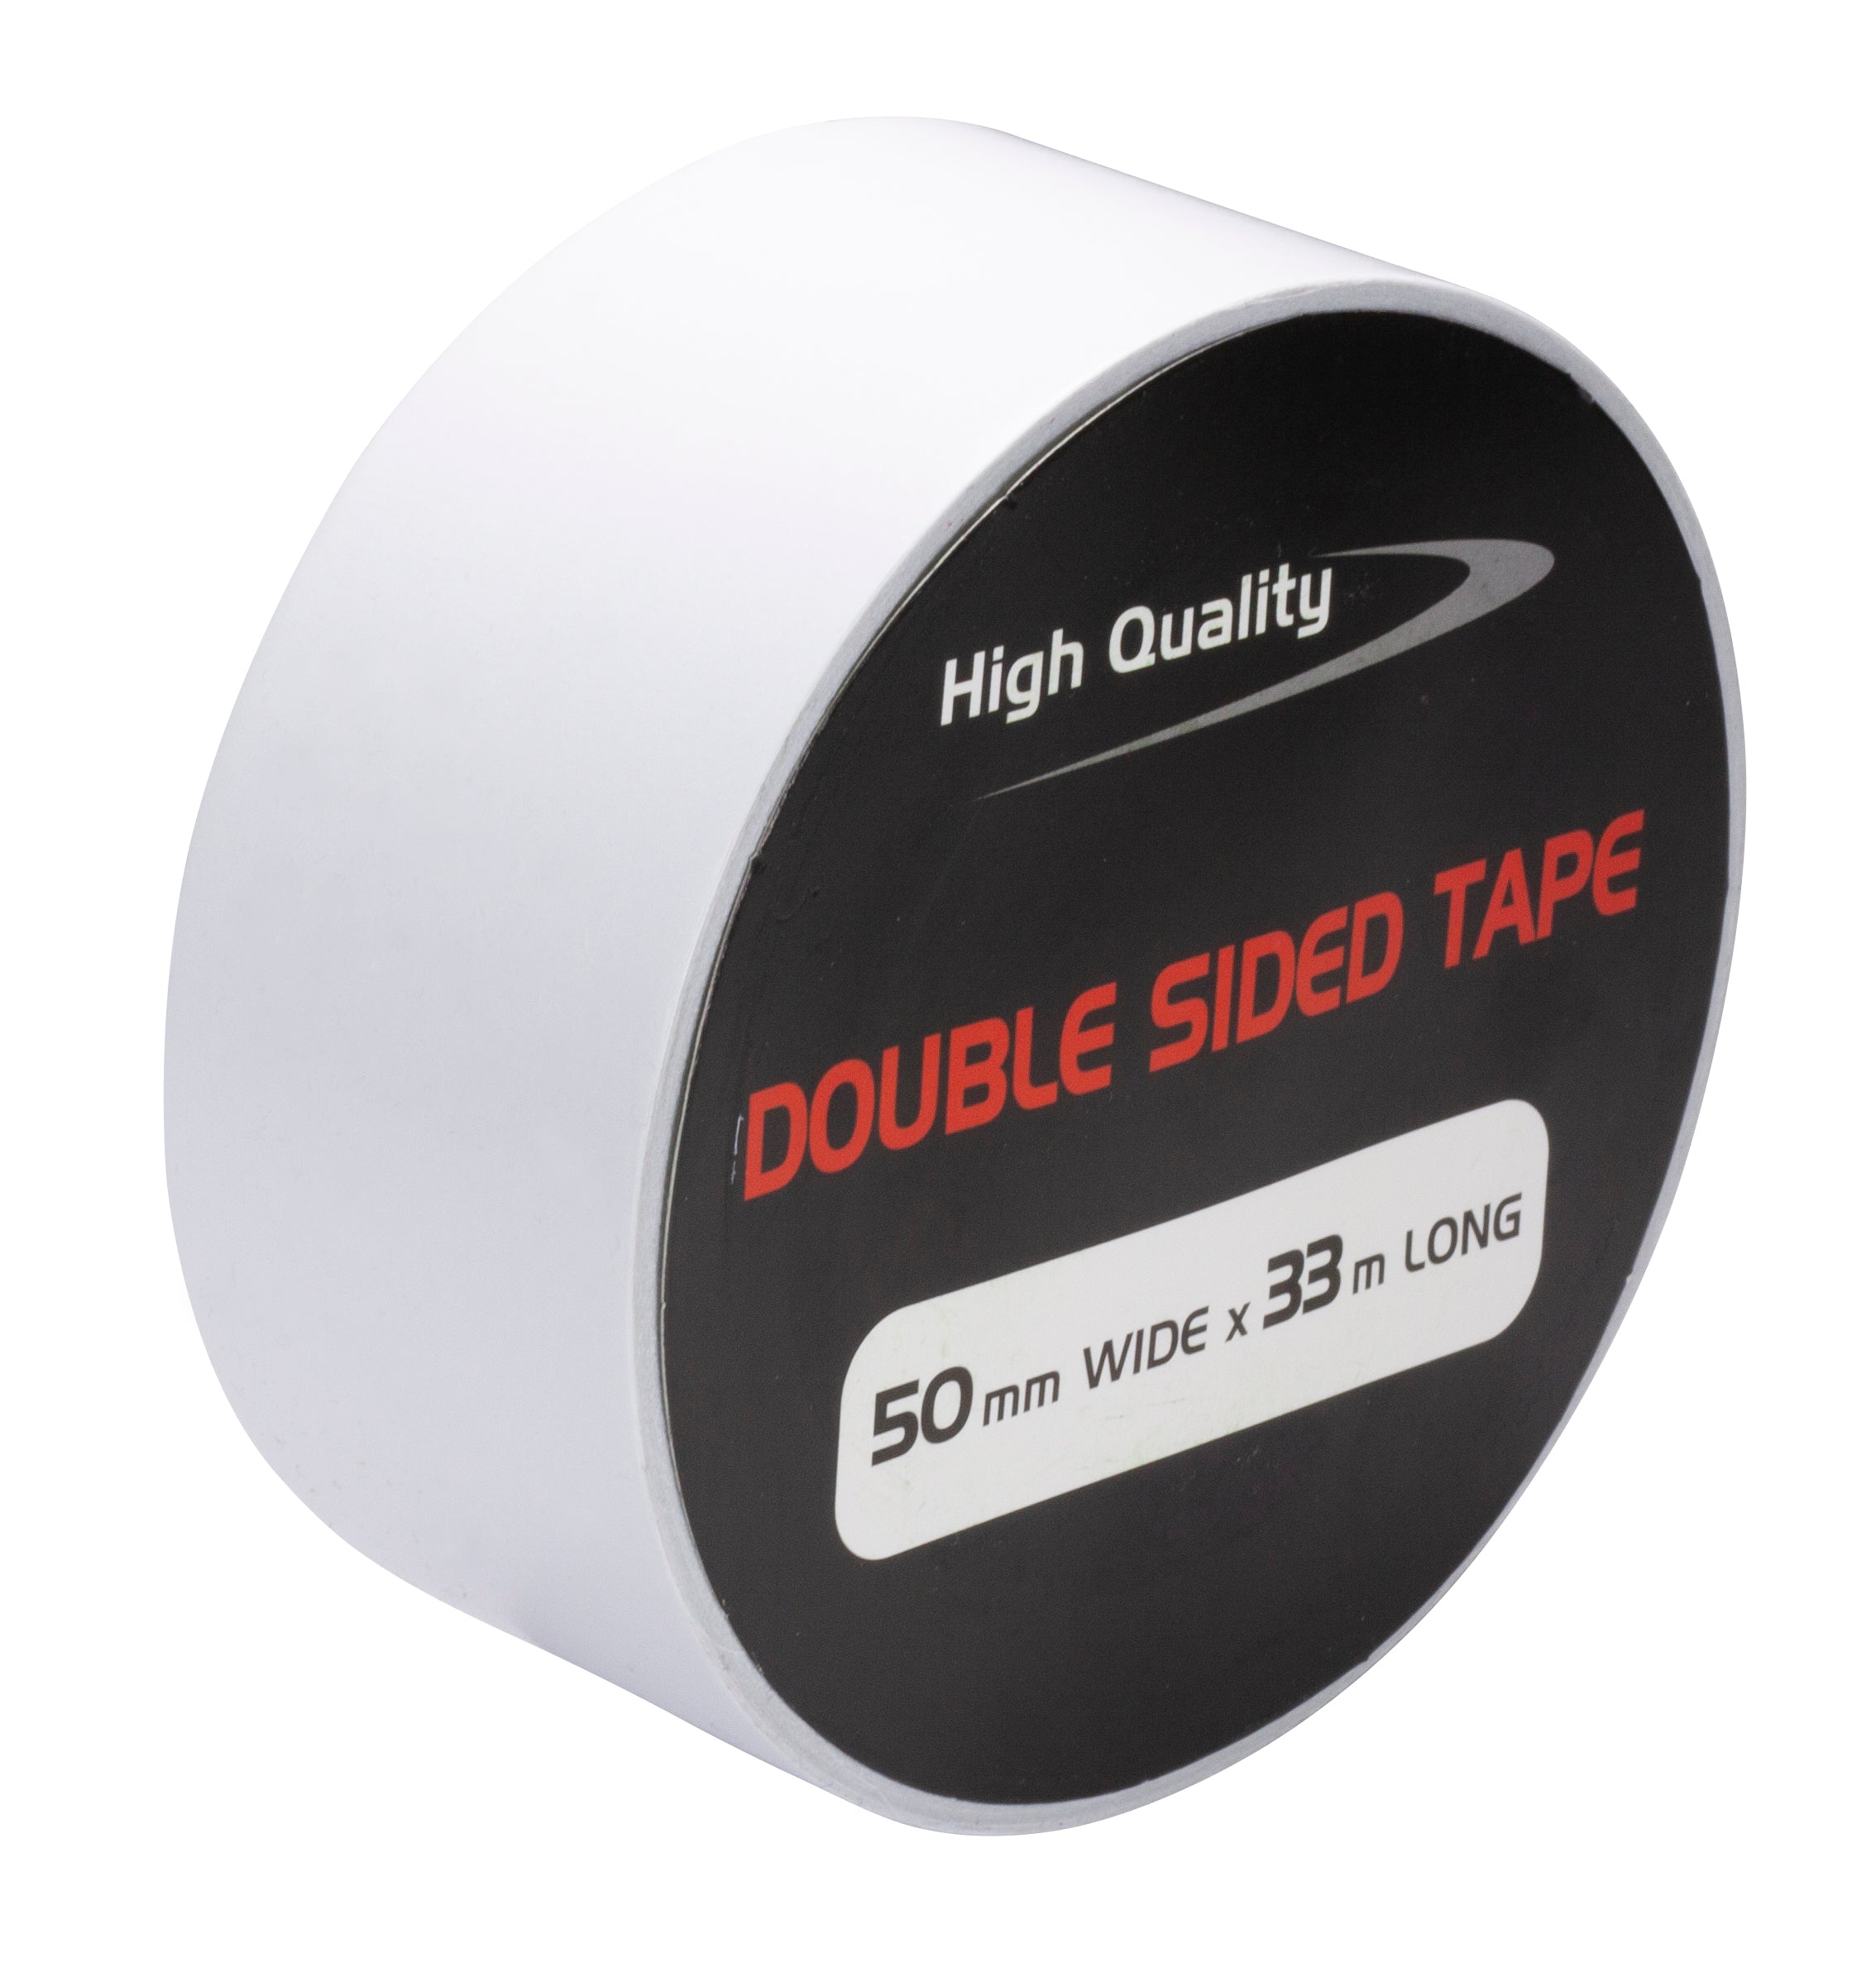 Double Sided Tape WHITE 50mm x 33m x 0.16mm Thickness - Per Pack